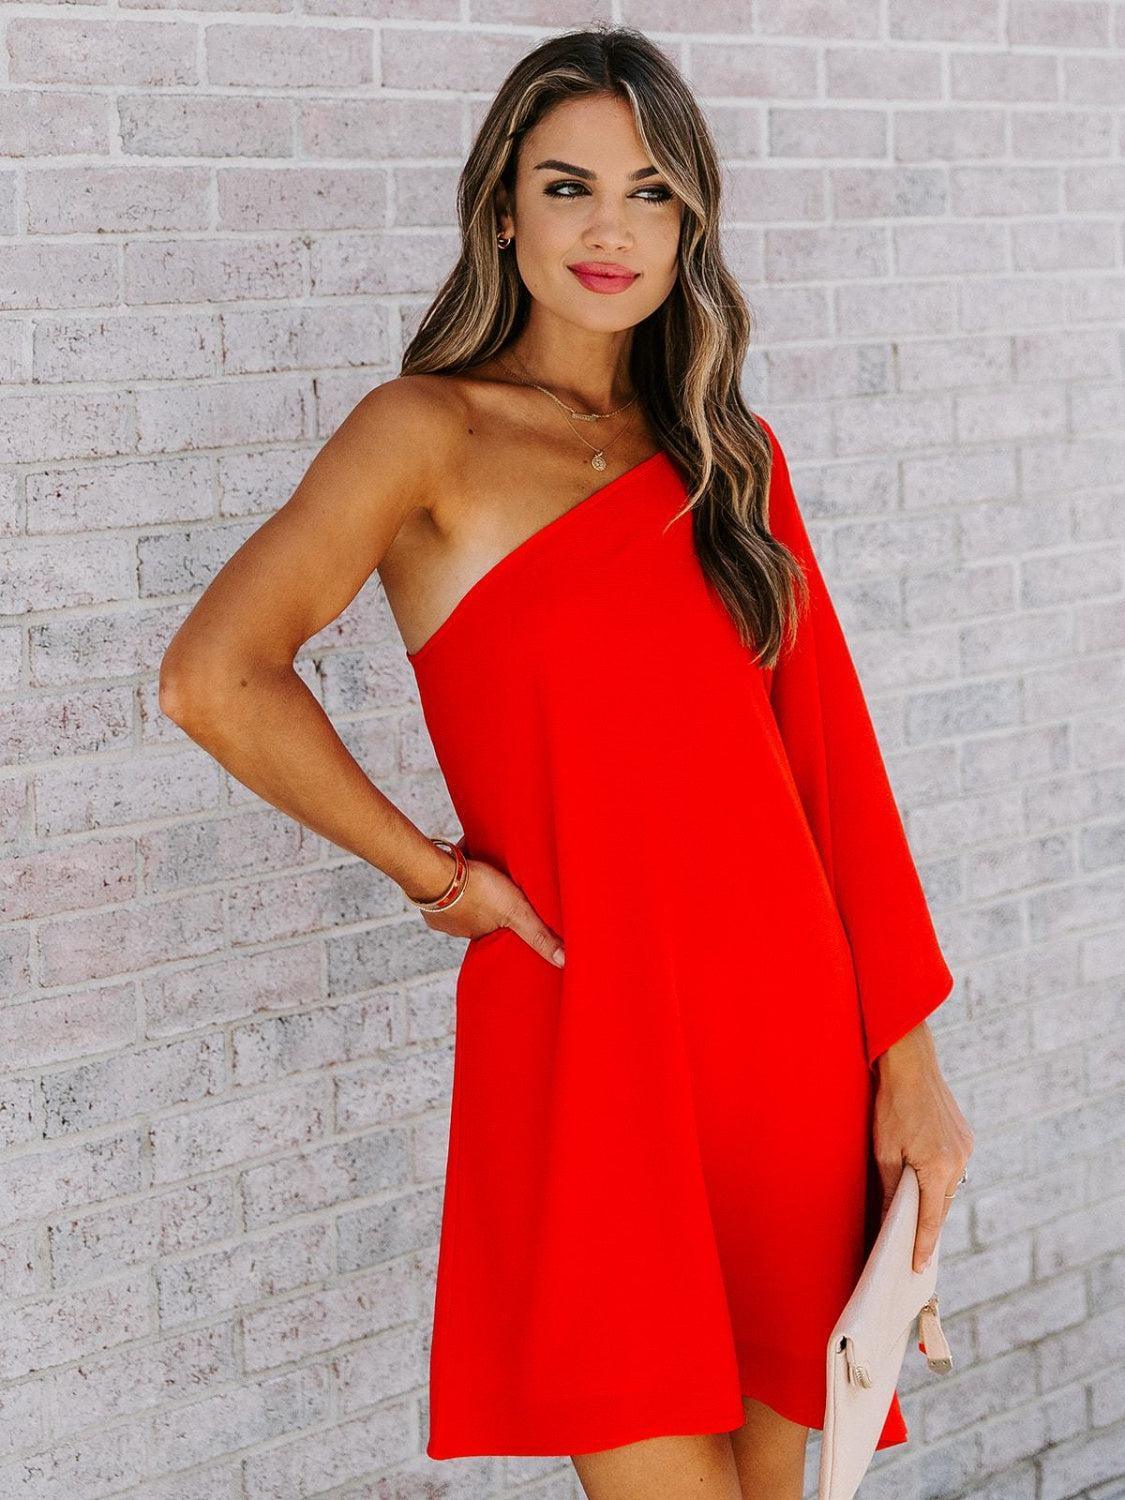 a woman standing in front of a brick wall wearing a red dress